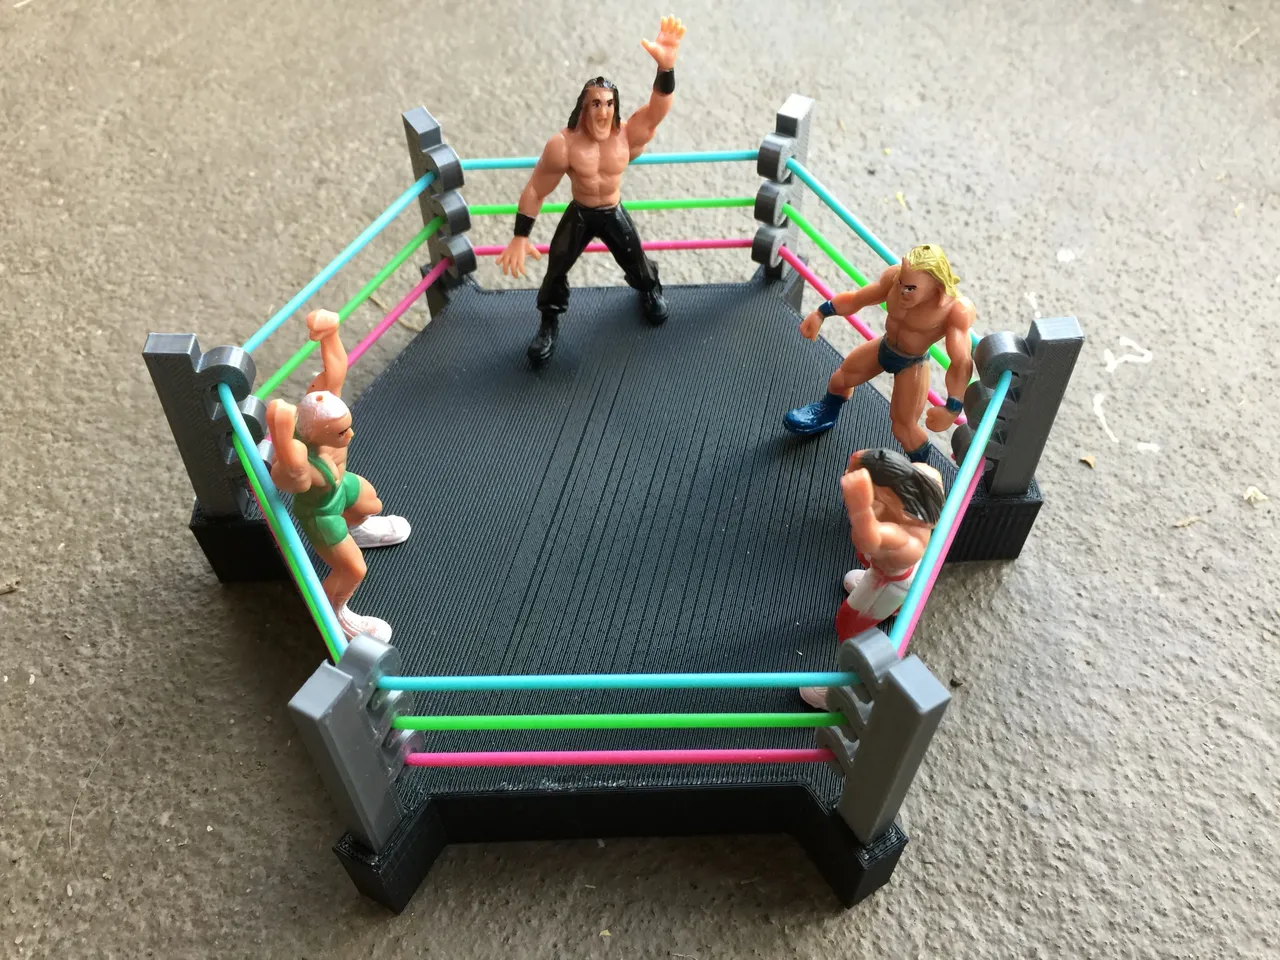 Professional Wrestling Ring | Home made gym, Professional wrestling,  Punching bag stand